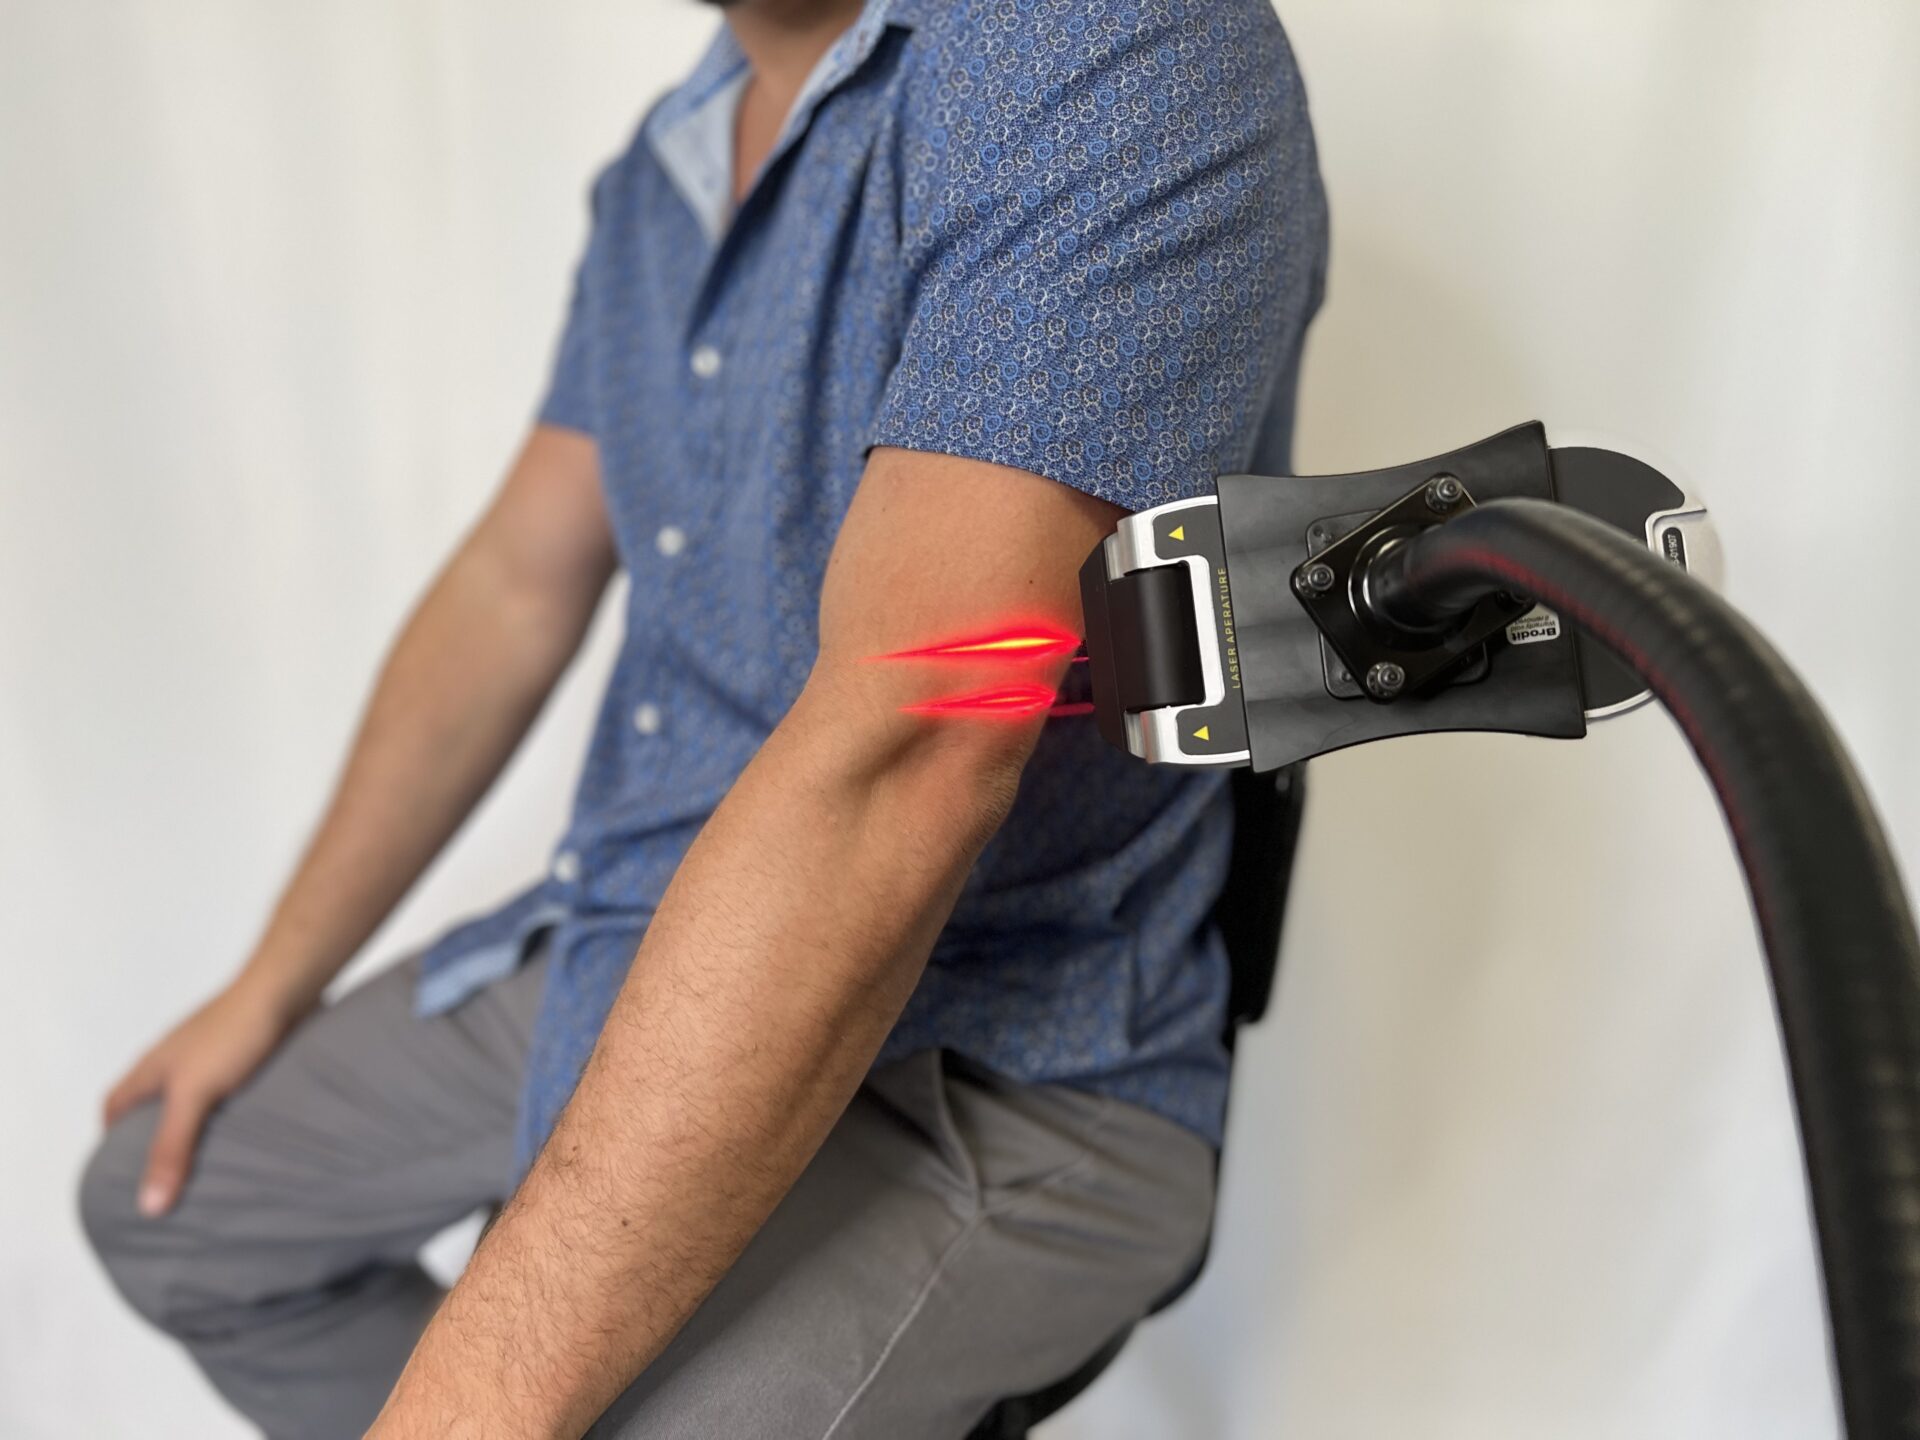 Laser being used in stand to treat elbow